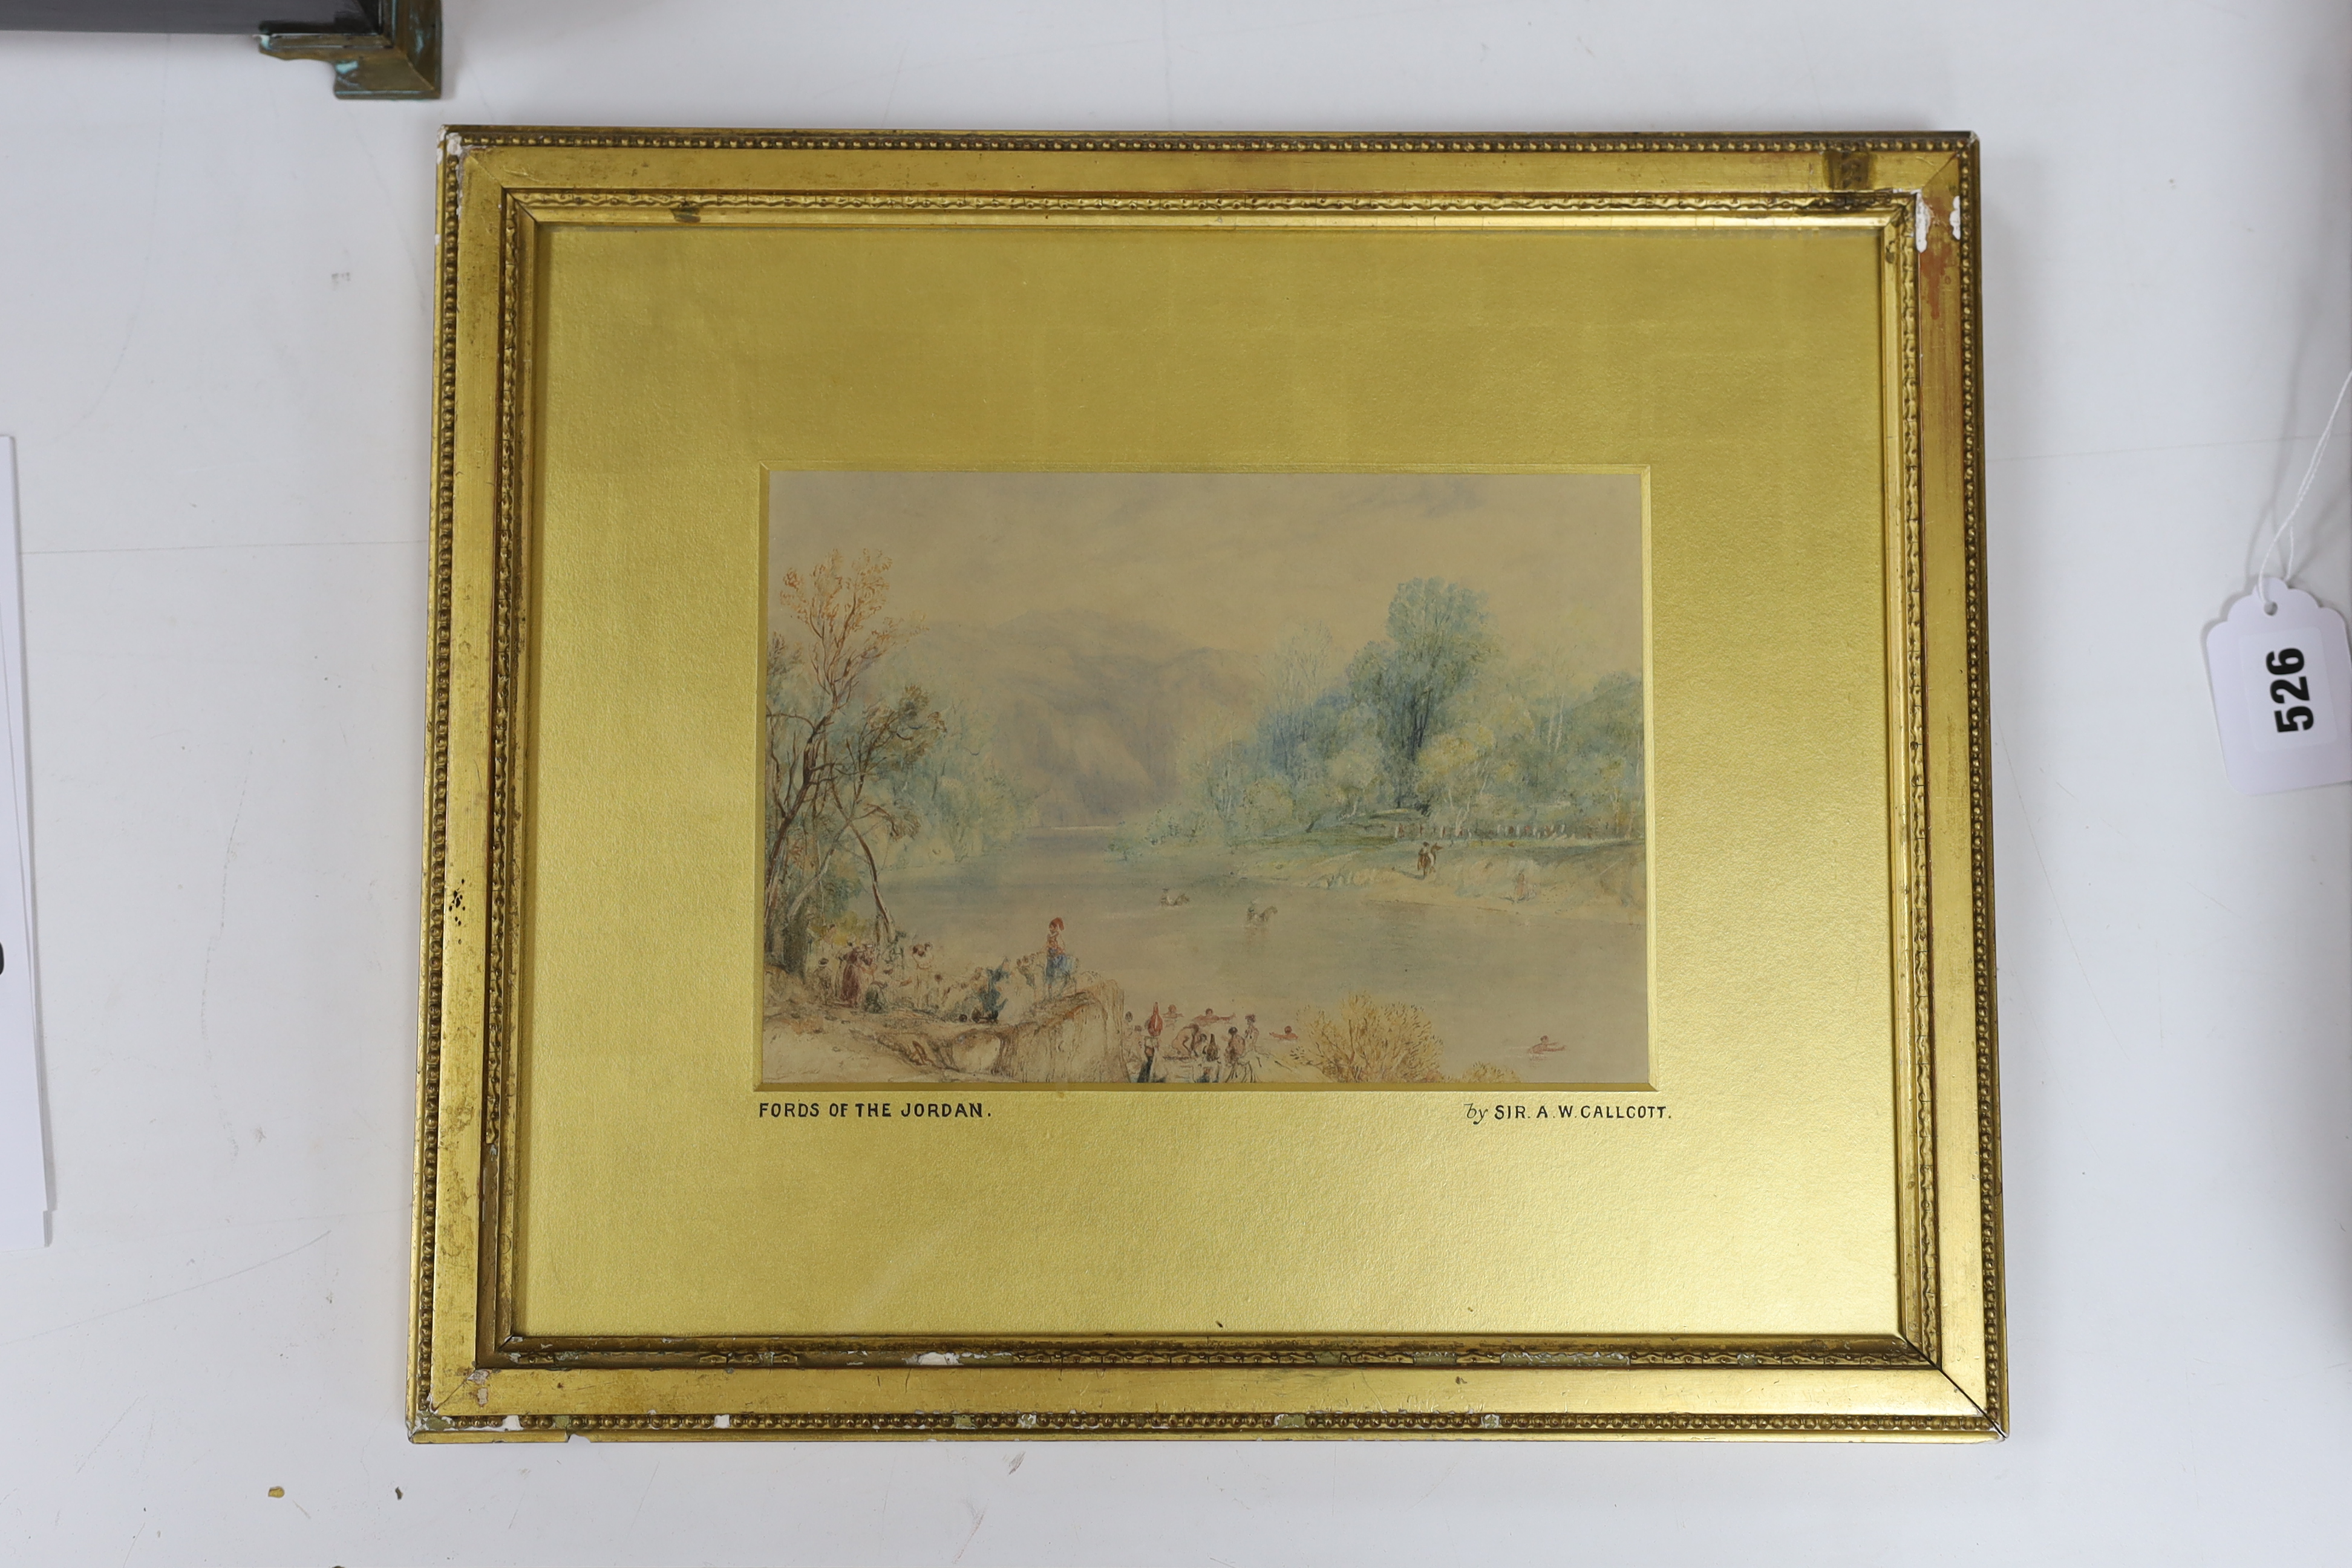 Augustus Wall Calcott RA (1779-1844), watercolour, ‘Fords of the Jordan’, inscribed to the mount, P & D Colnaghi & Co. label verso, 16 x 22cm